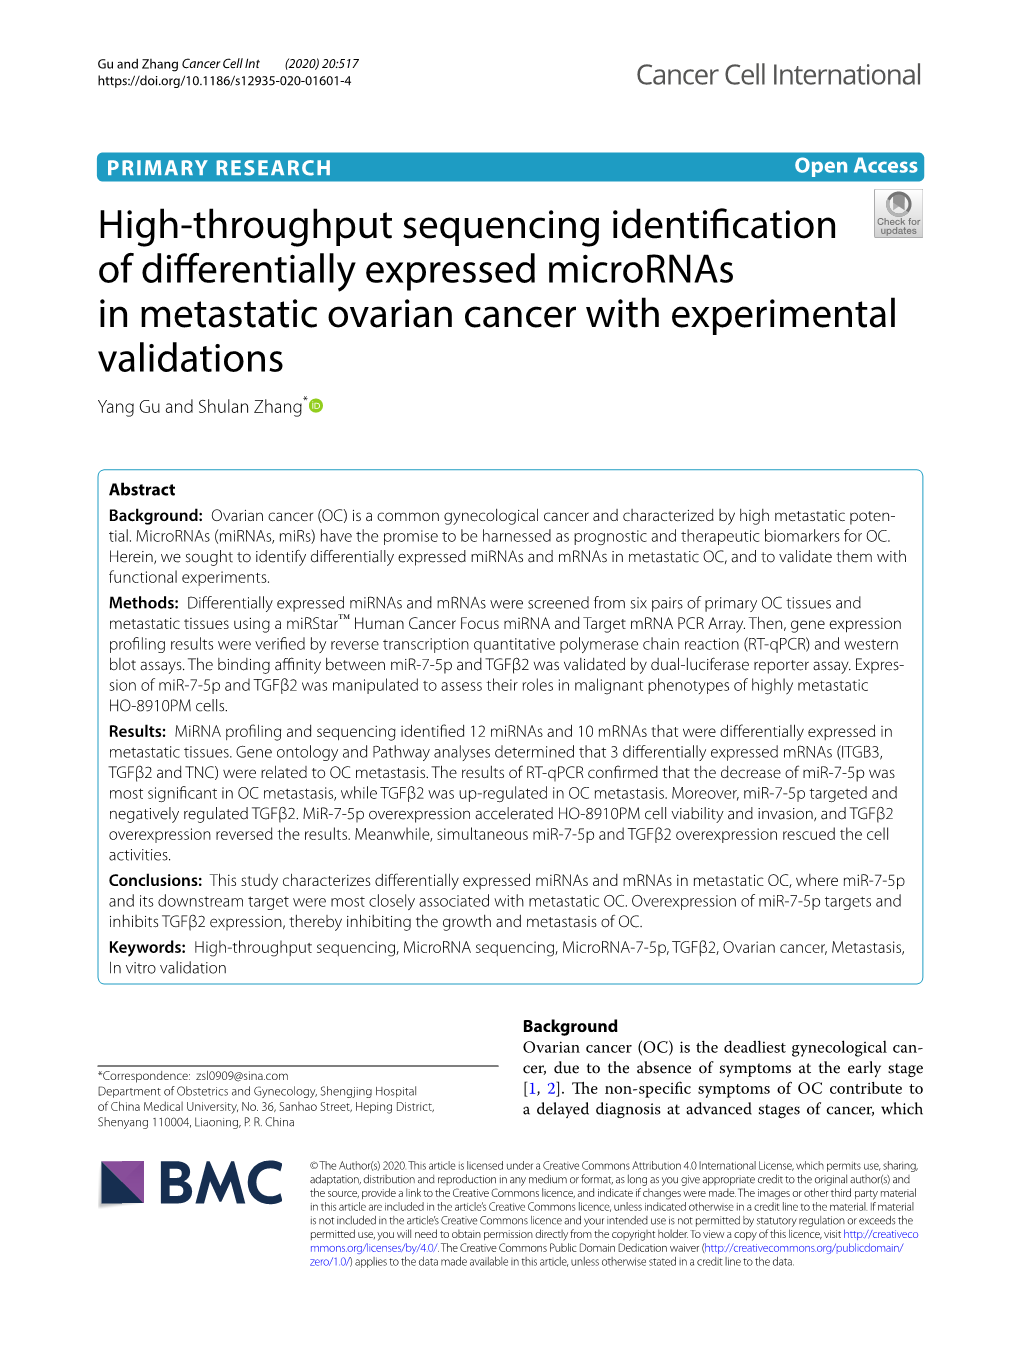 High-Throughput Sequencing Identification of Differentially Expressed Micrornas in Metastatic Ovarian Cancer with Experimental V